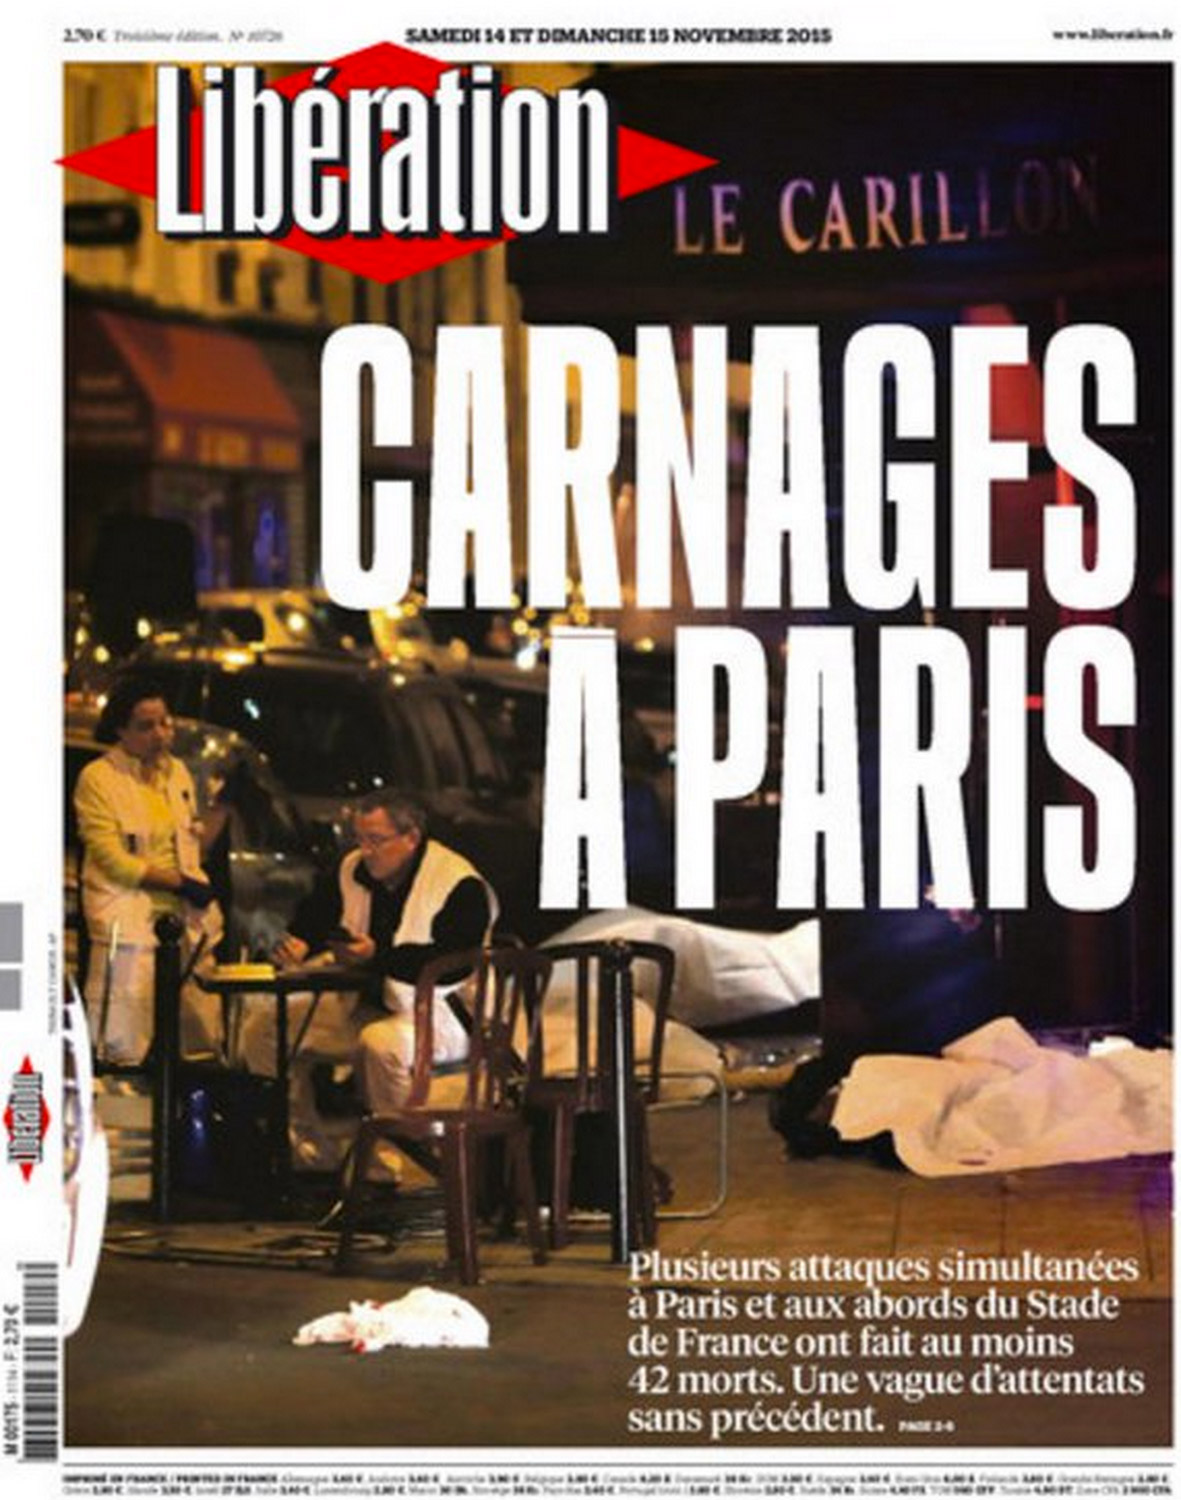 The front page of Liberation after the Paris attacks on Nov. 13, 2015